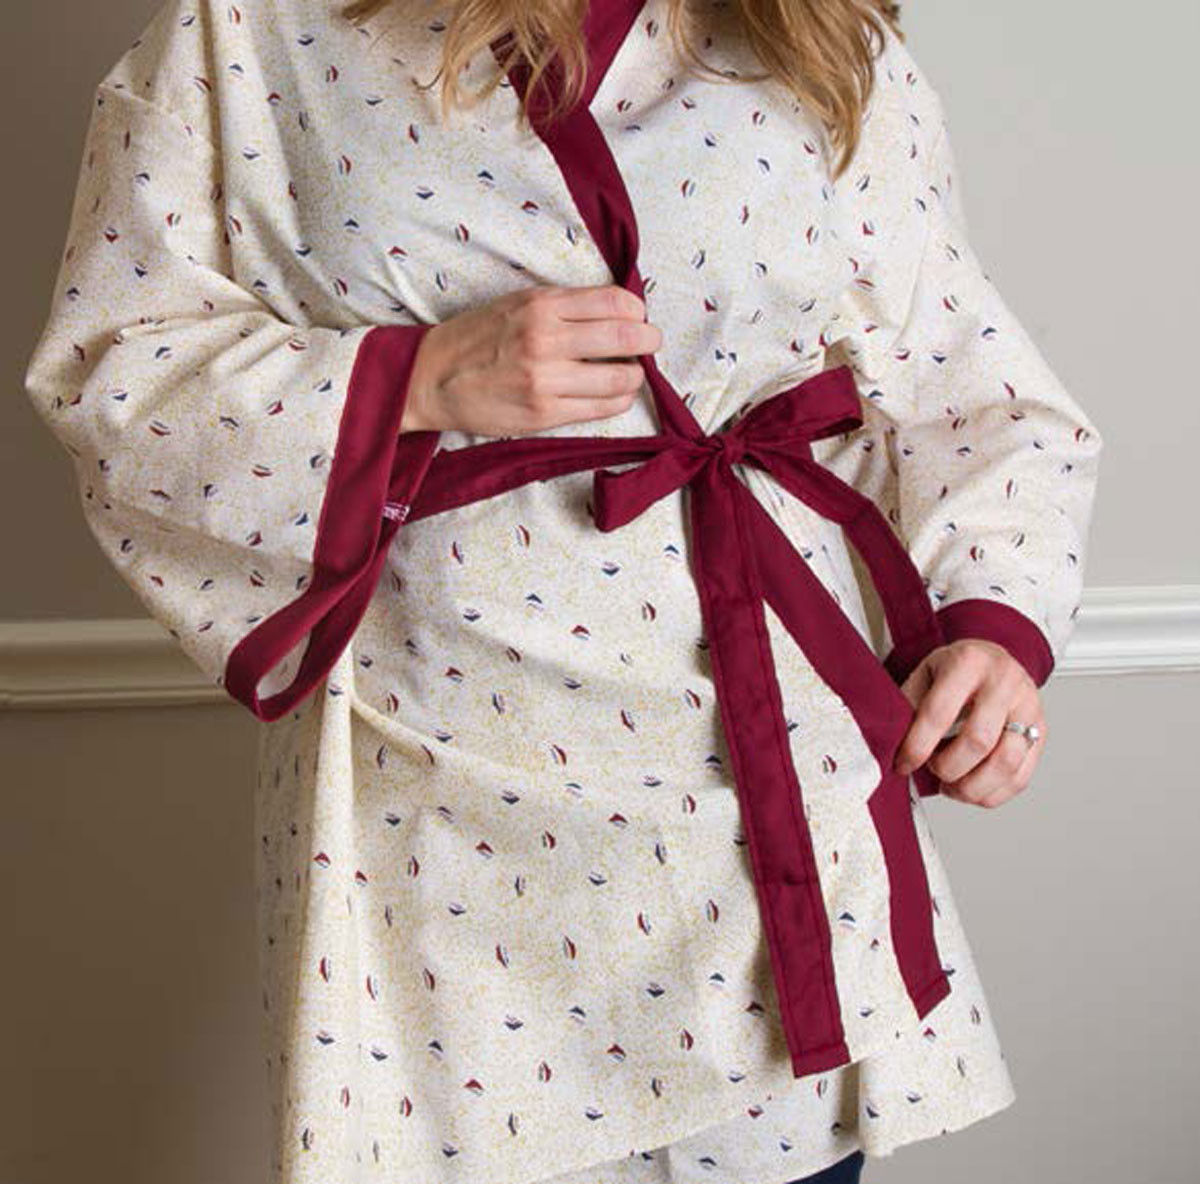 What types and materials are used in these sponge print mammography gowns?